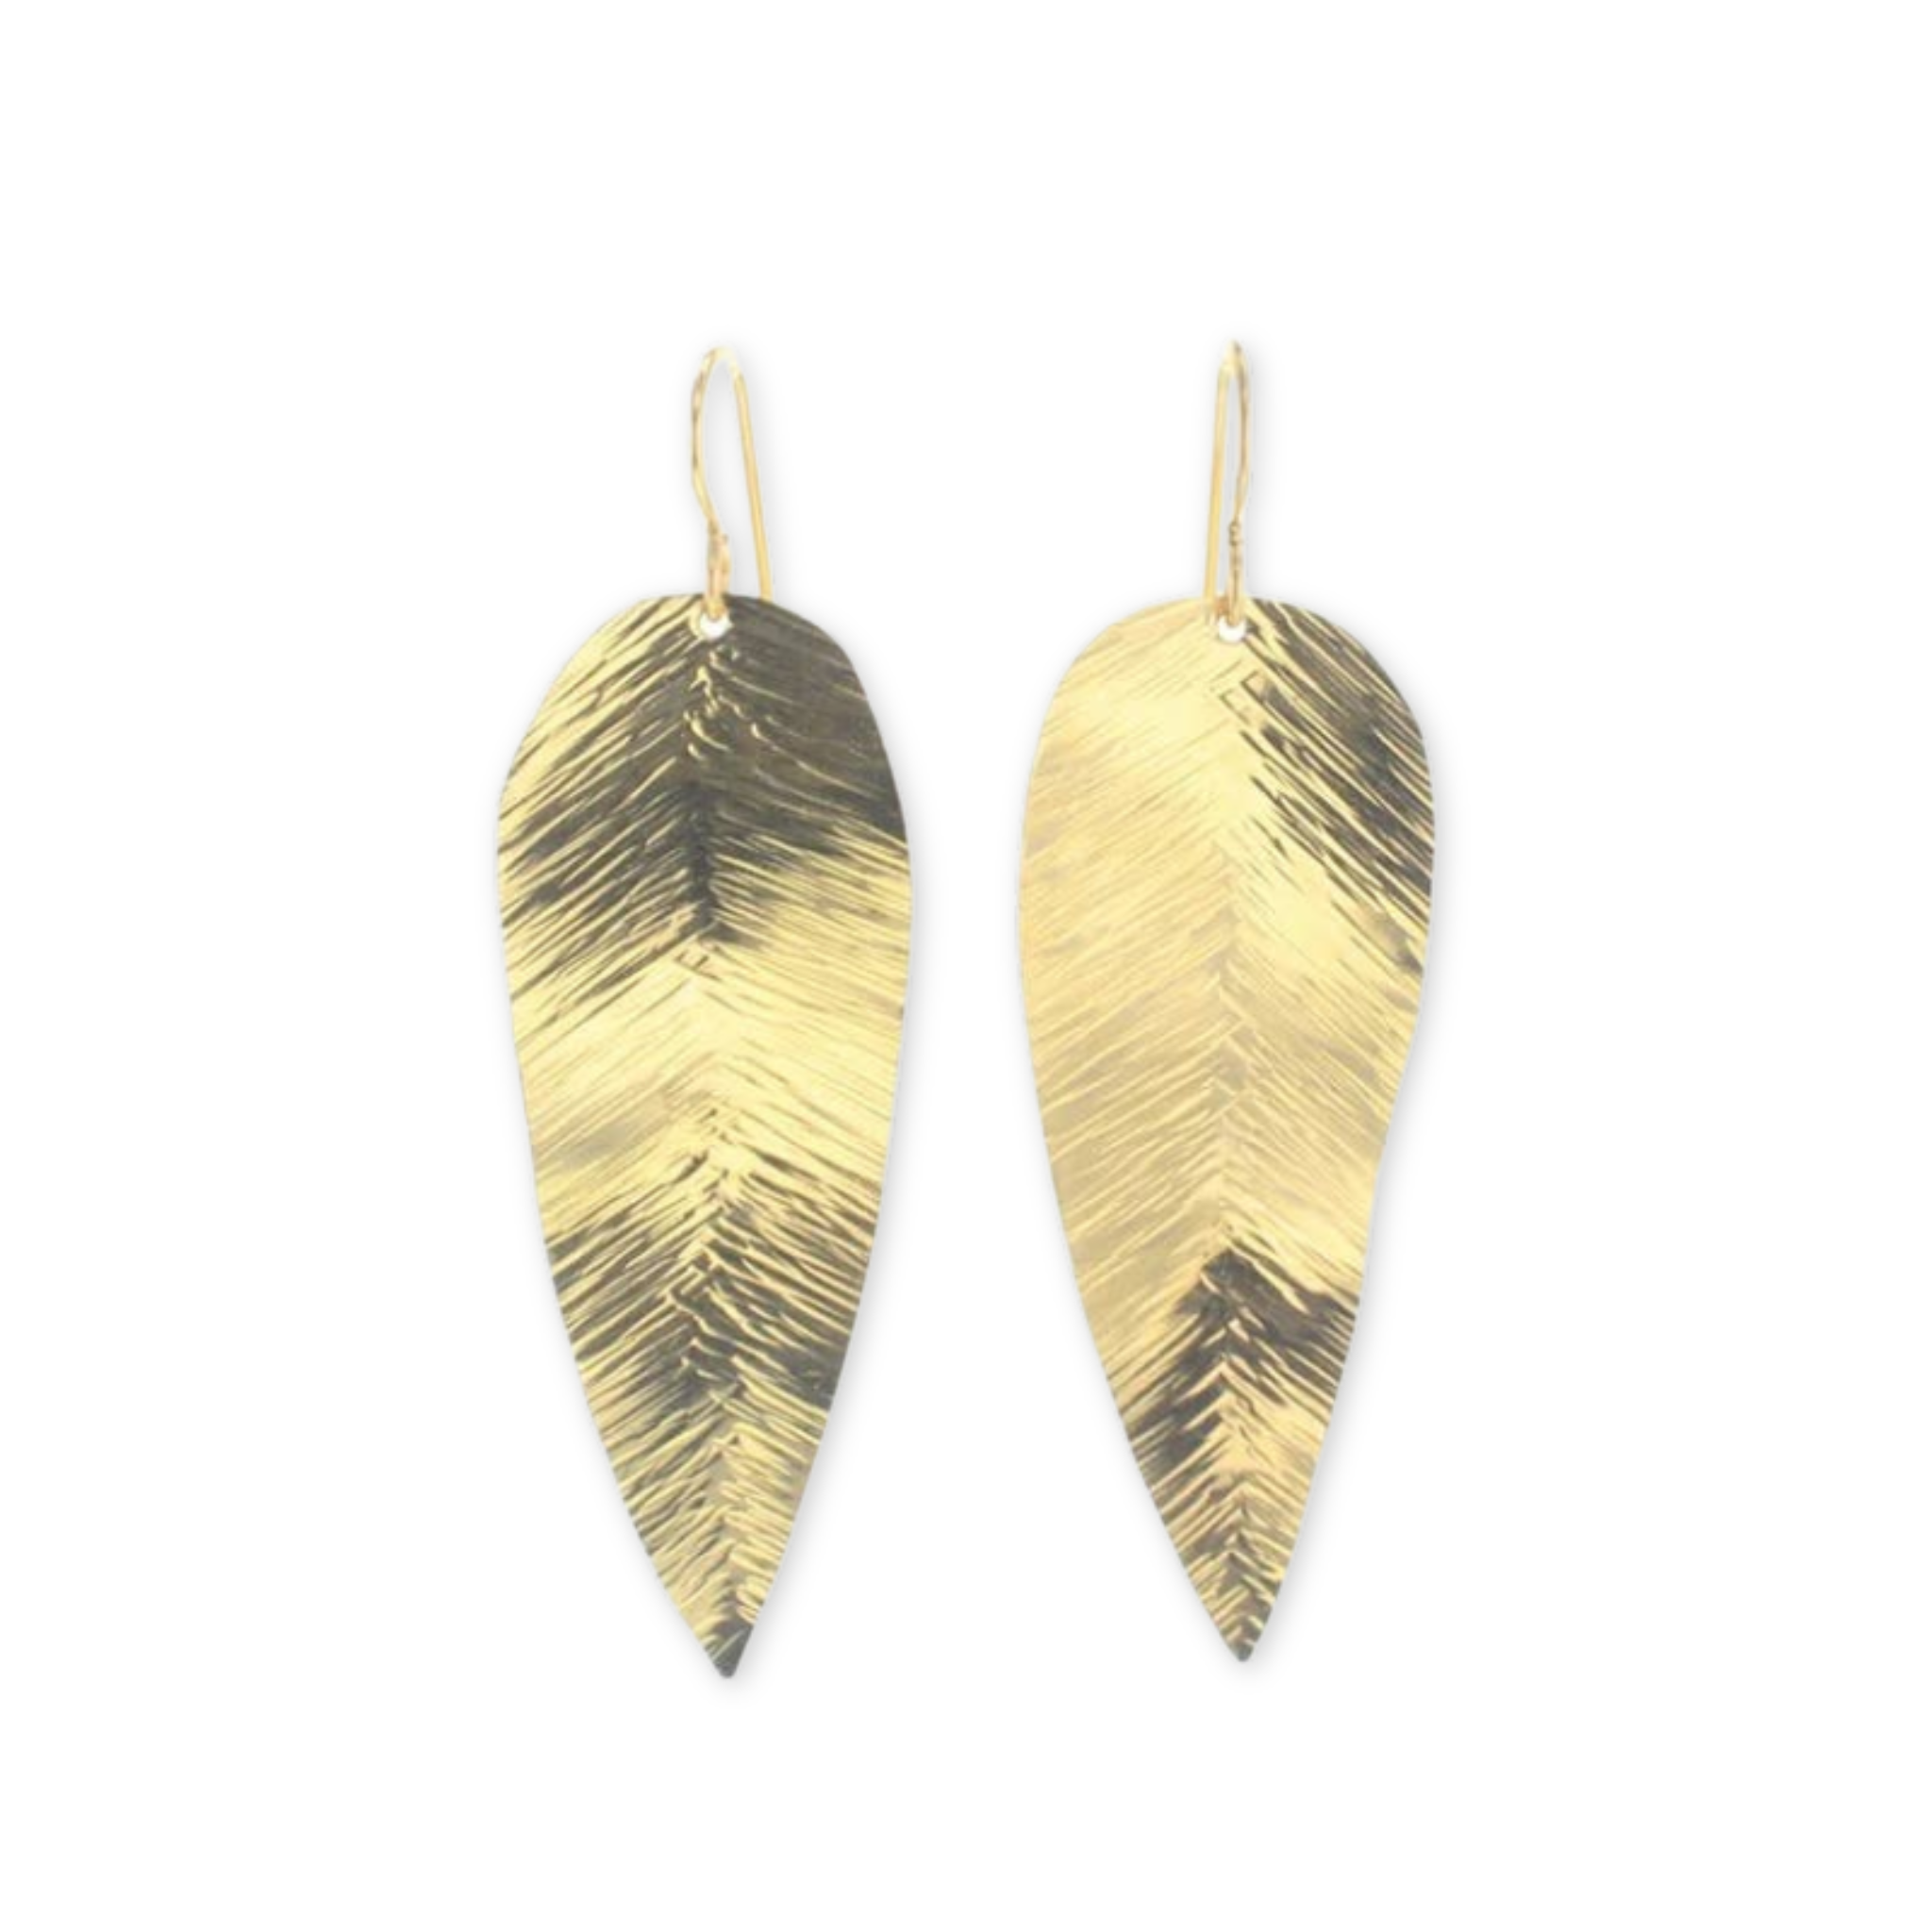 a pair of gold earrings in the shape of a fern leaf